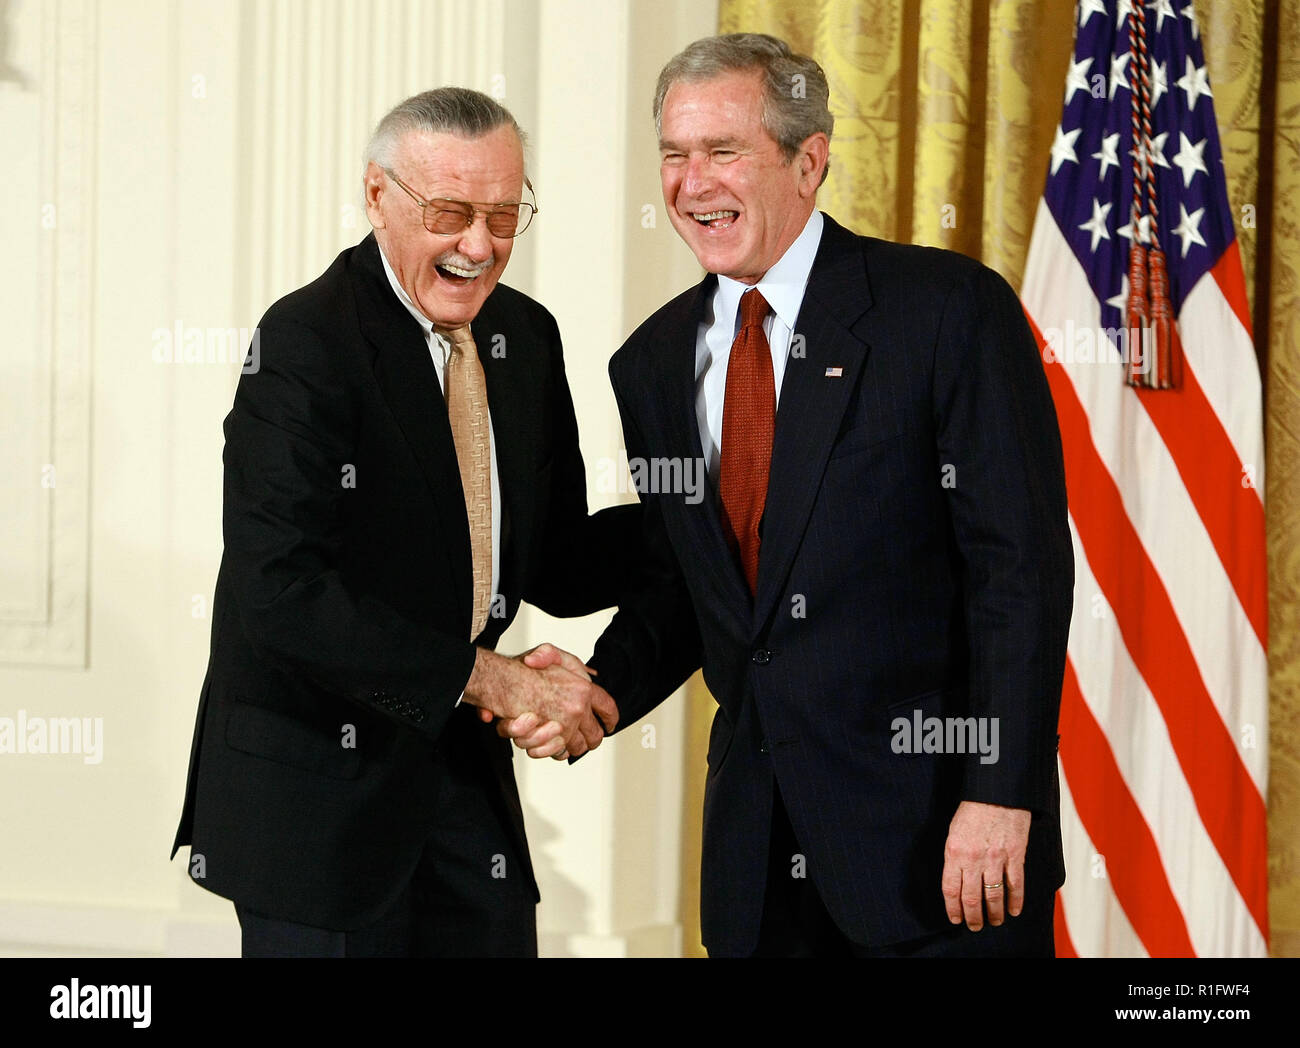 Washington, DC. 17th Nov, 2008. Washington, DC - November 17, 2008 -- United States President George W. Bush congratulates Stan Lee, founder of POW! Entertainment before presenting him with the 2008 National Medals of Arts award during an event in the East Room at the White House on Monday, November17, 2008 in Washington, DC. During the event president Bush presented recipients with awards for the National Medals of Arts and the National Humanities Medal. Credit: Mark Wilson - Pool via CNP | usage worldwide Credit: dpa/Alamy Live News Stock Photo